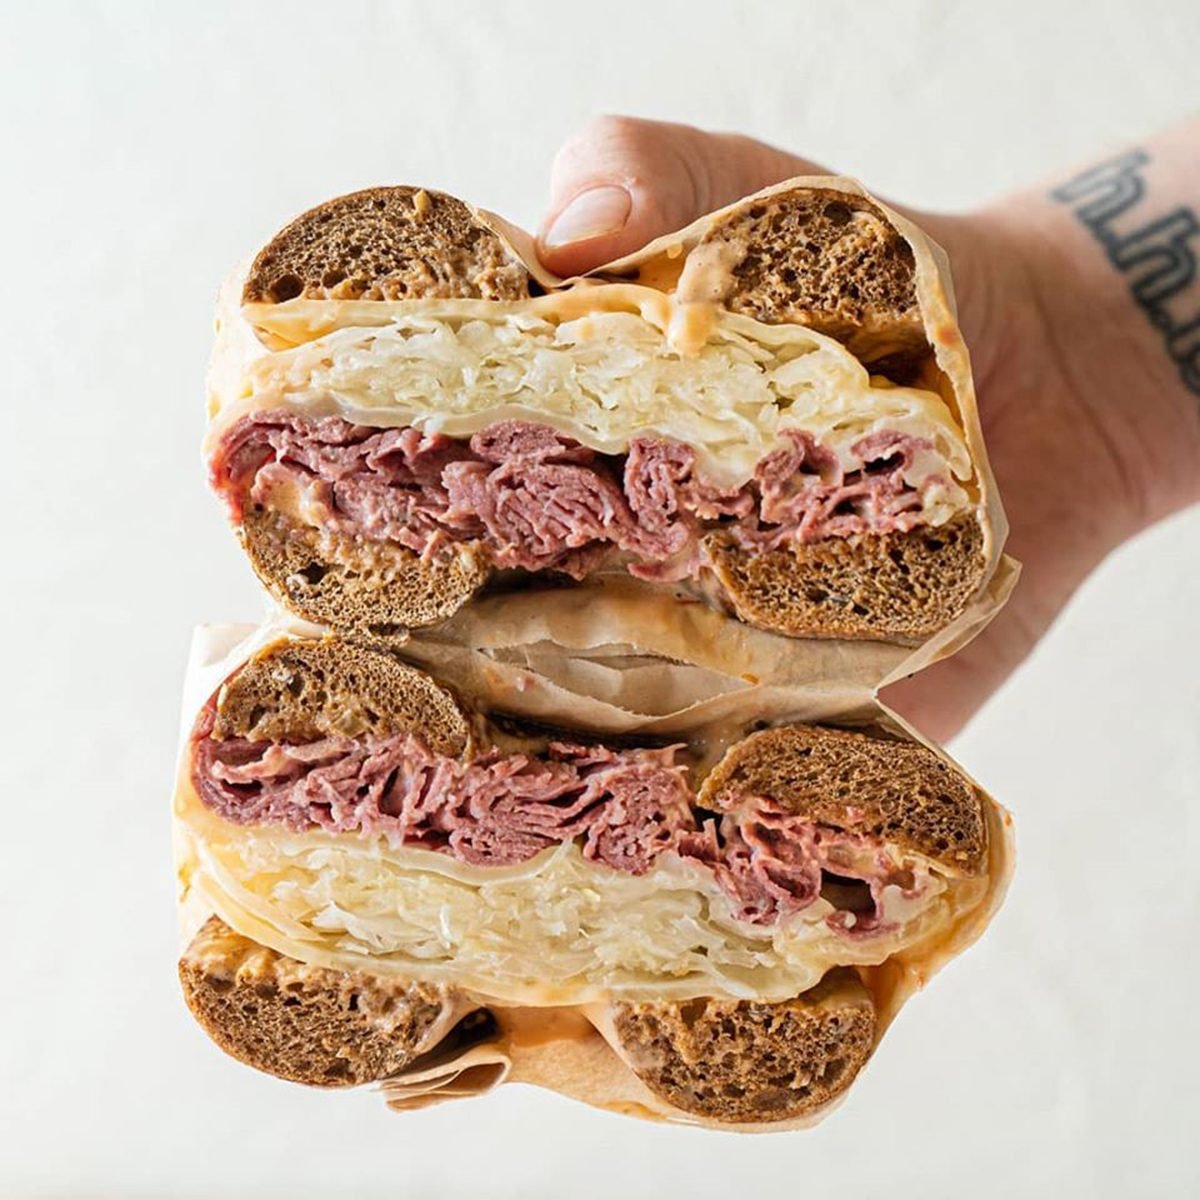 The Best Bagel Shops in America: How to Find Great Bagels ...